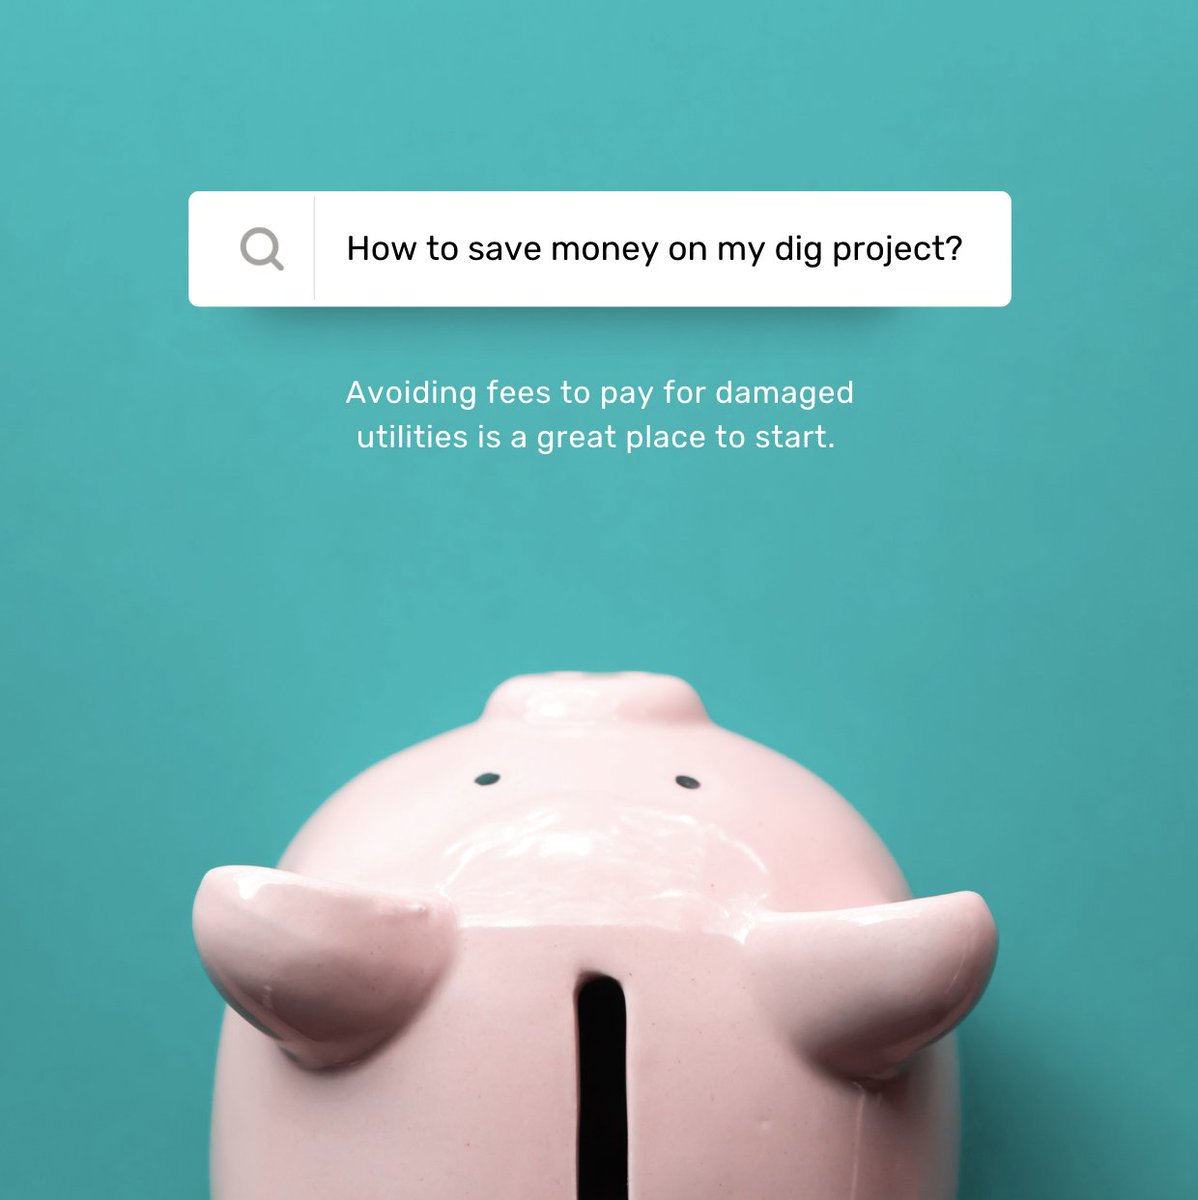 Be safe . . .and save money on your next digging project.  Now that’s dollars and cents-ible!  sask1stcall.com/request-online/
#freebreakfast #besafeSK #digsafe #digsafemonth #NDSM #clickbeforeyoudig